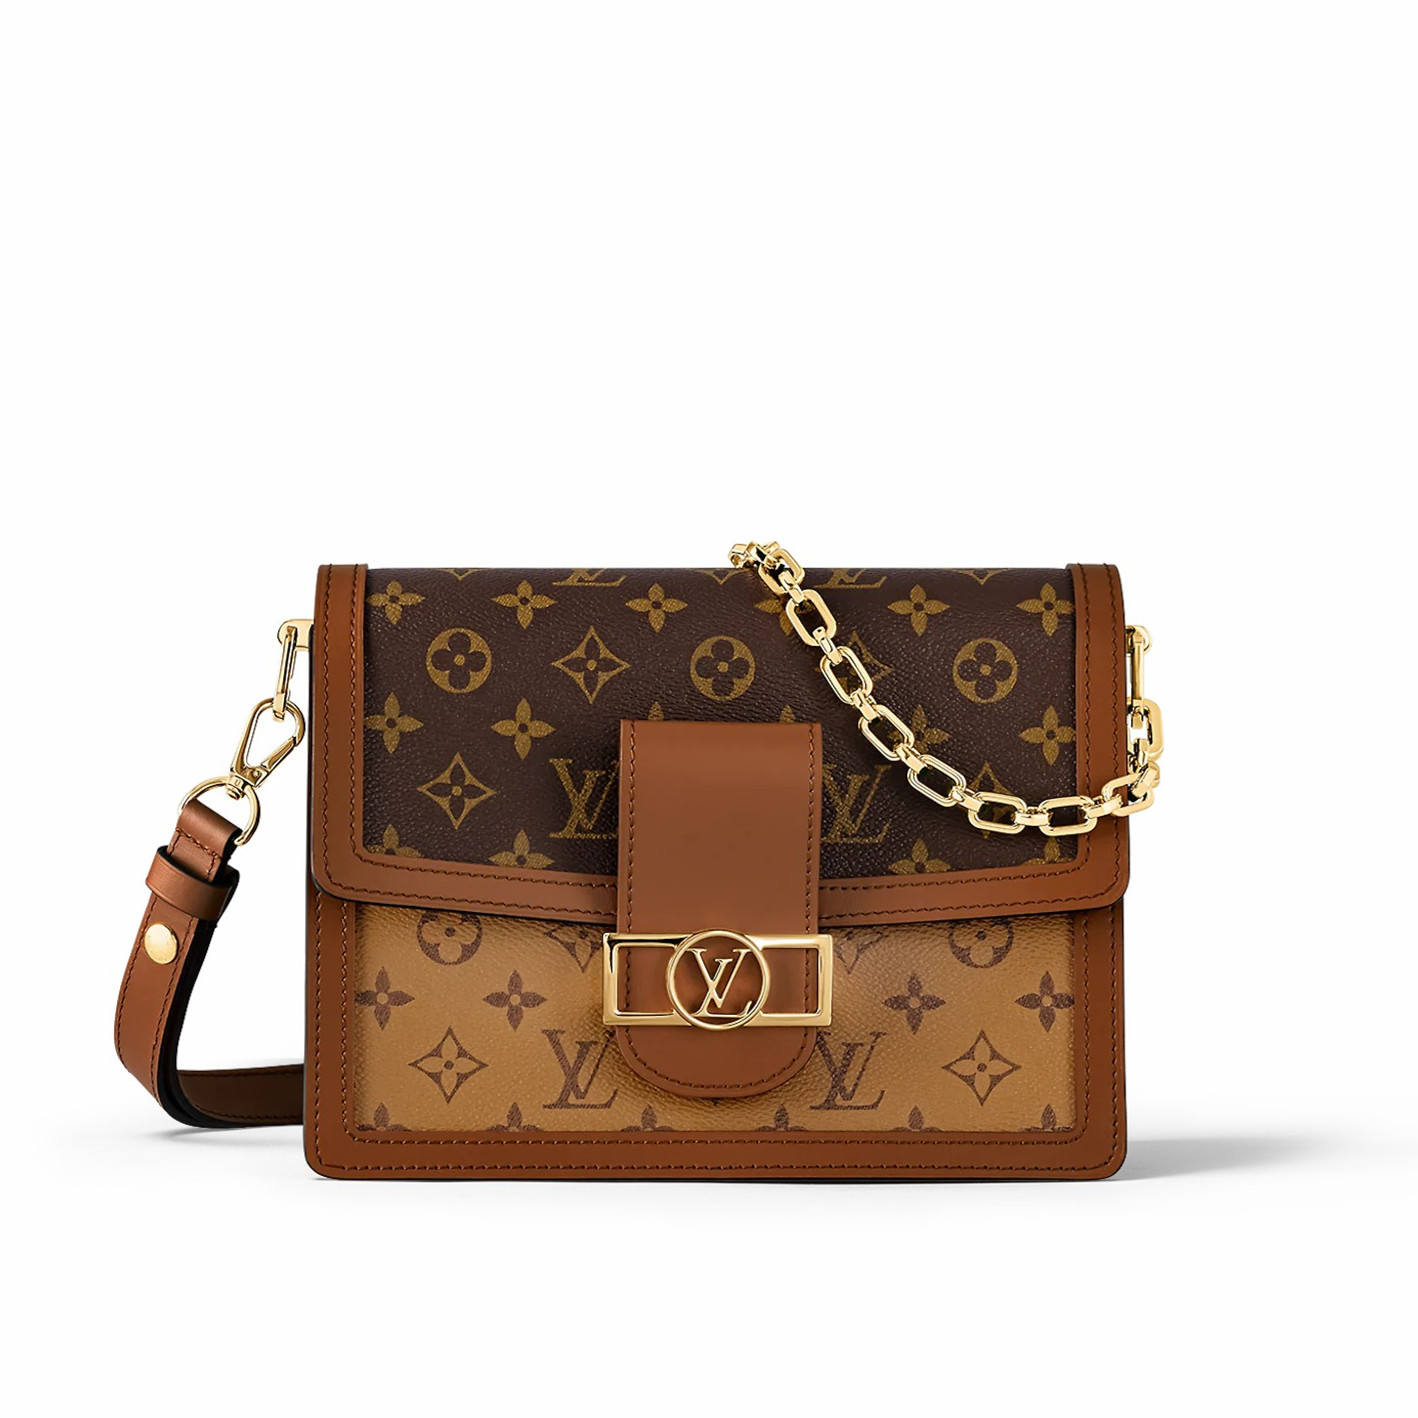 【Louis Vuitton】 DAUPHINEチェーンバッグMM